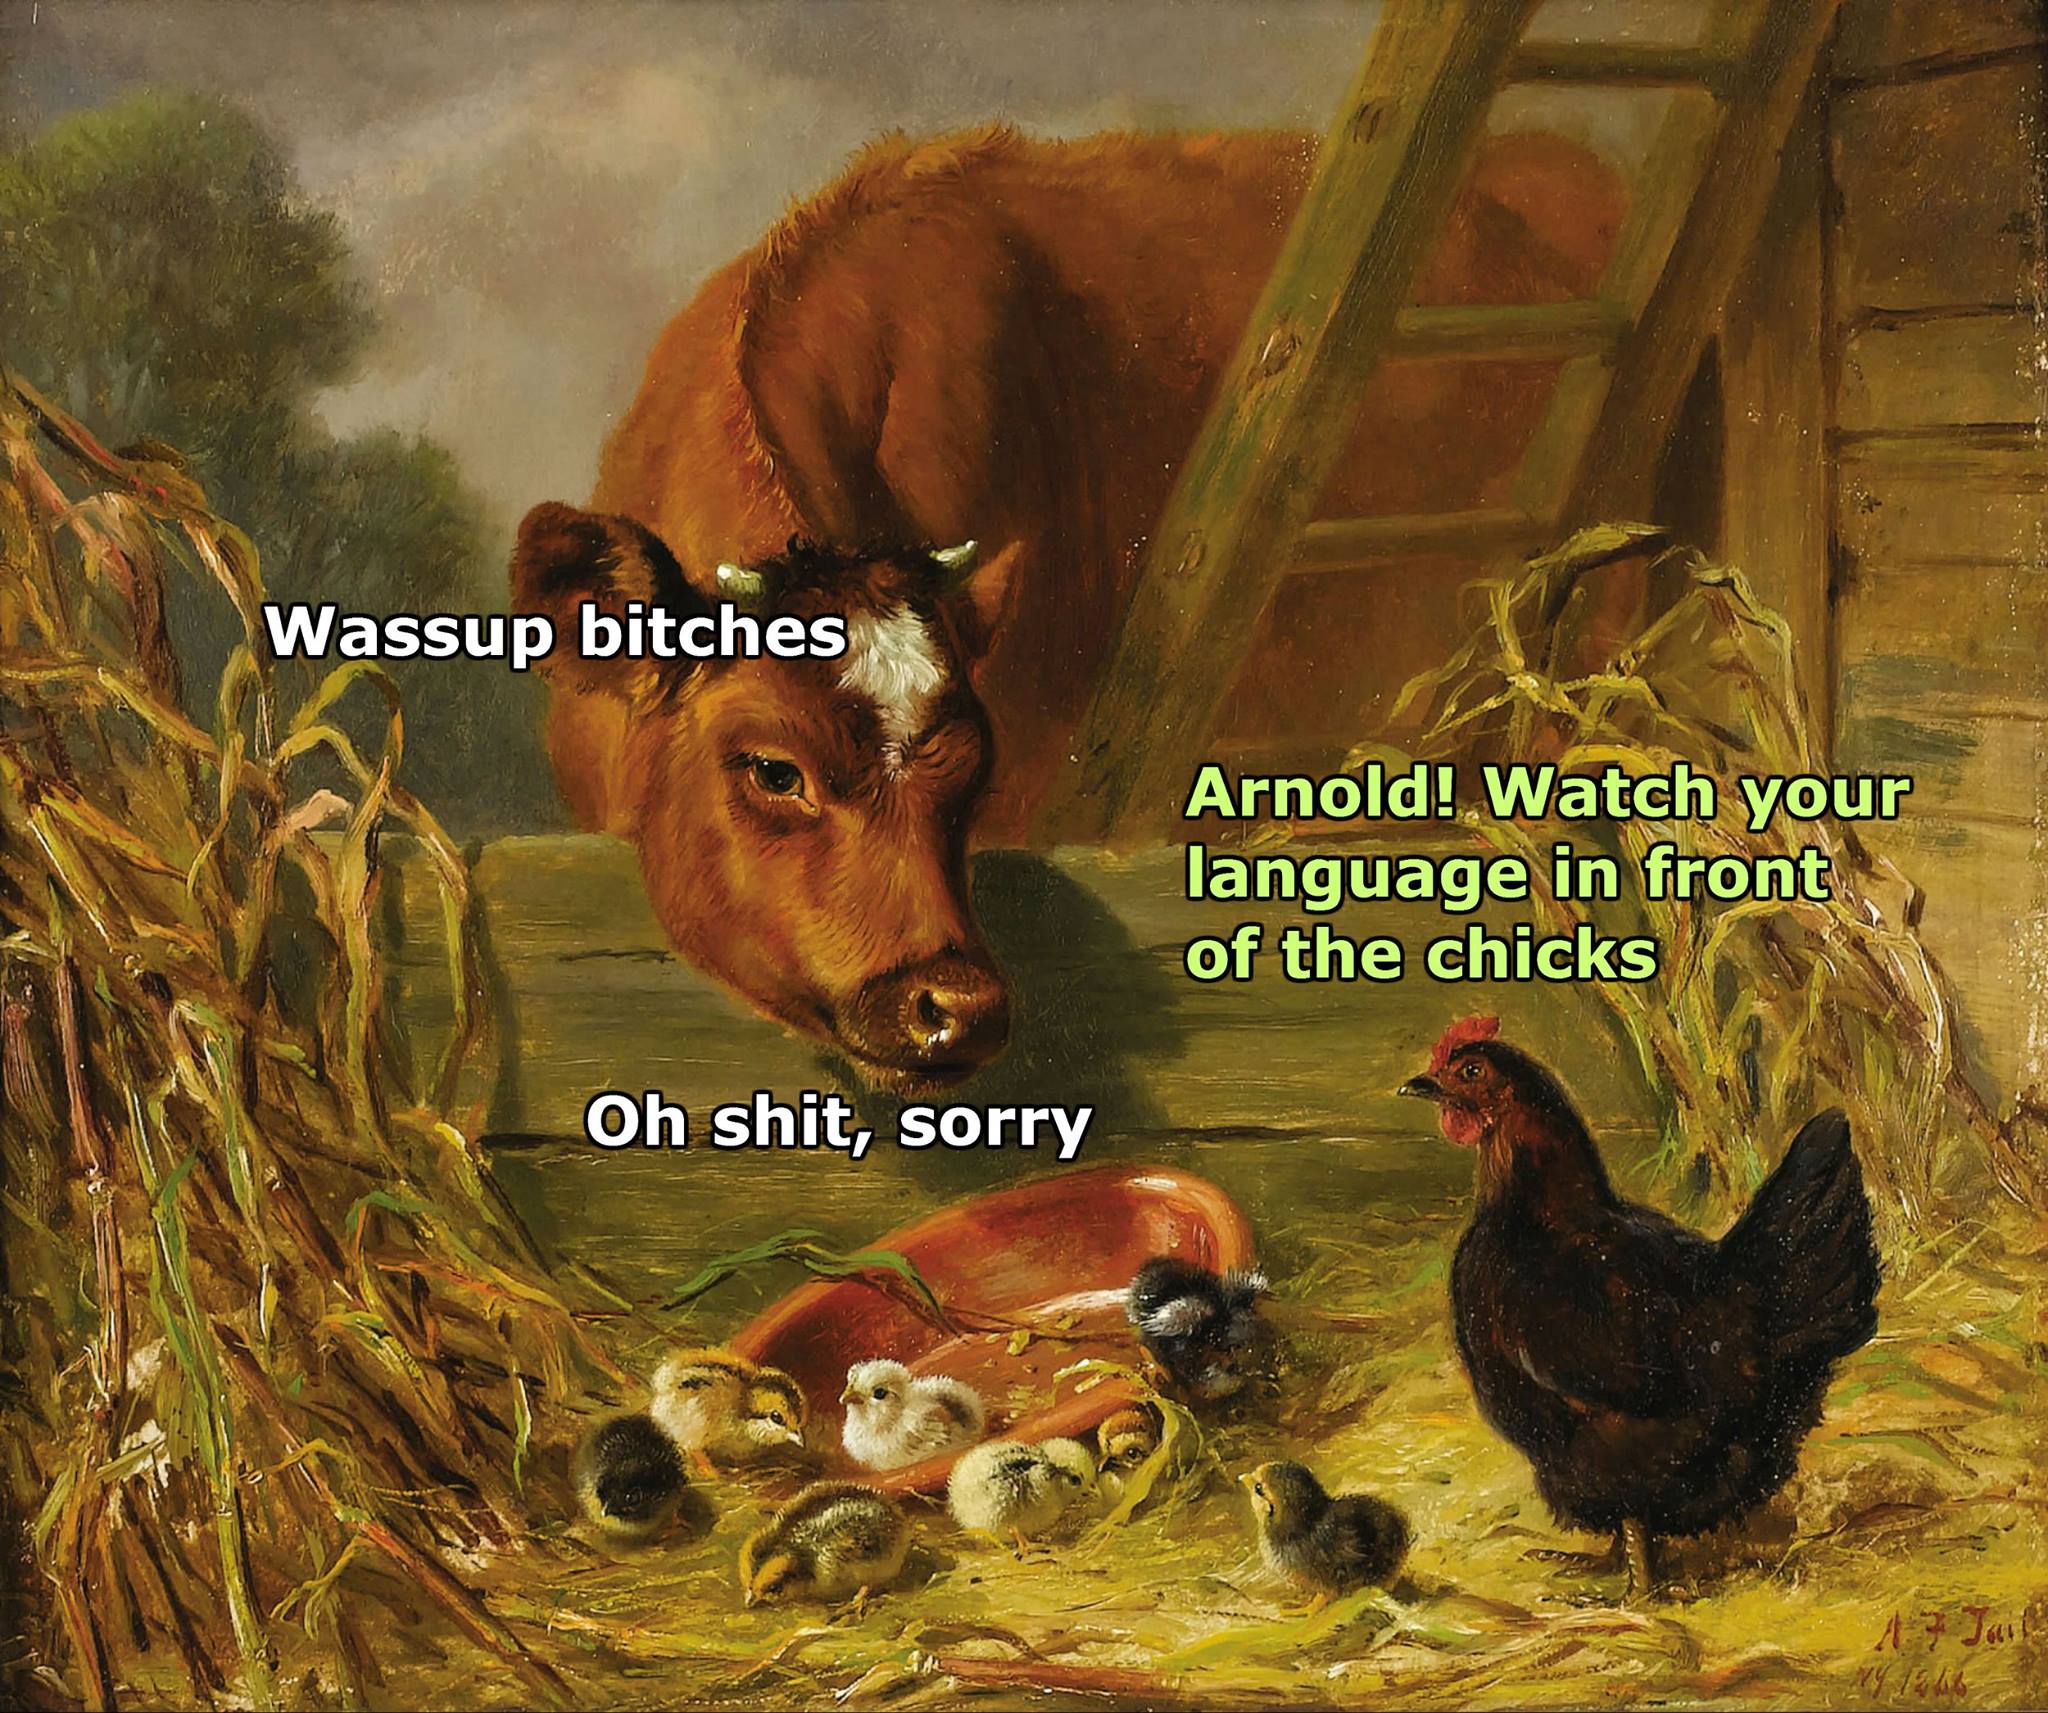 barnyard scene - Wassup bitches Wassup bitches Arnold! Watch your language in front of the chicks Oh shit, sorry